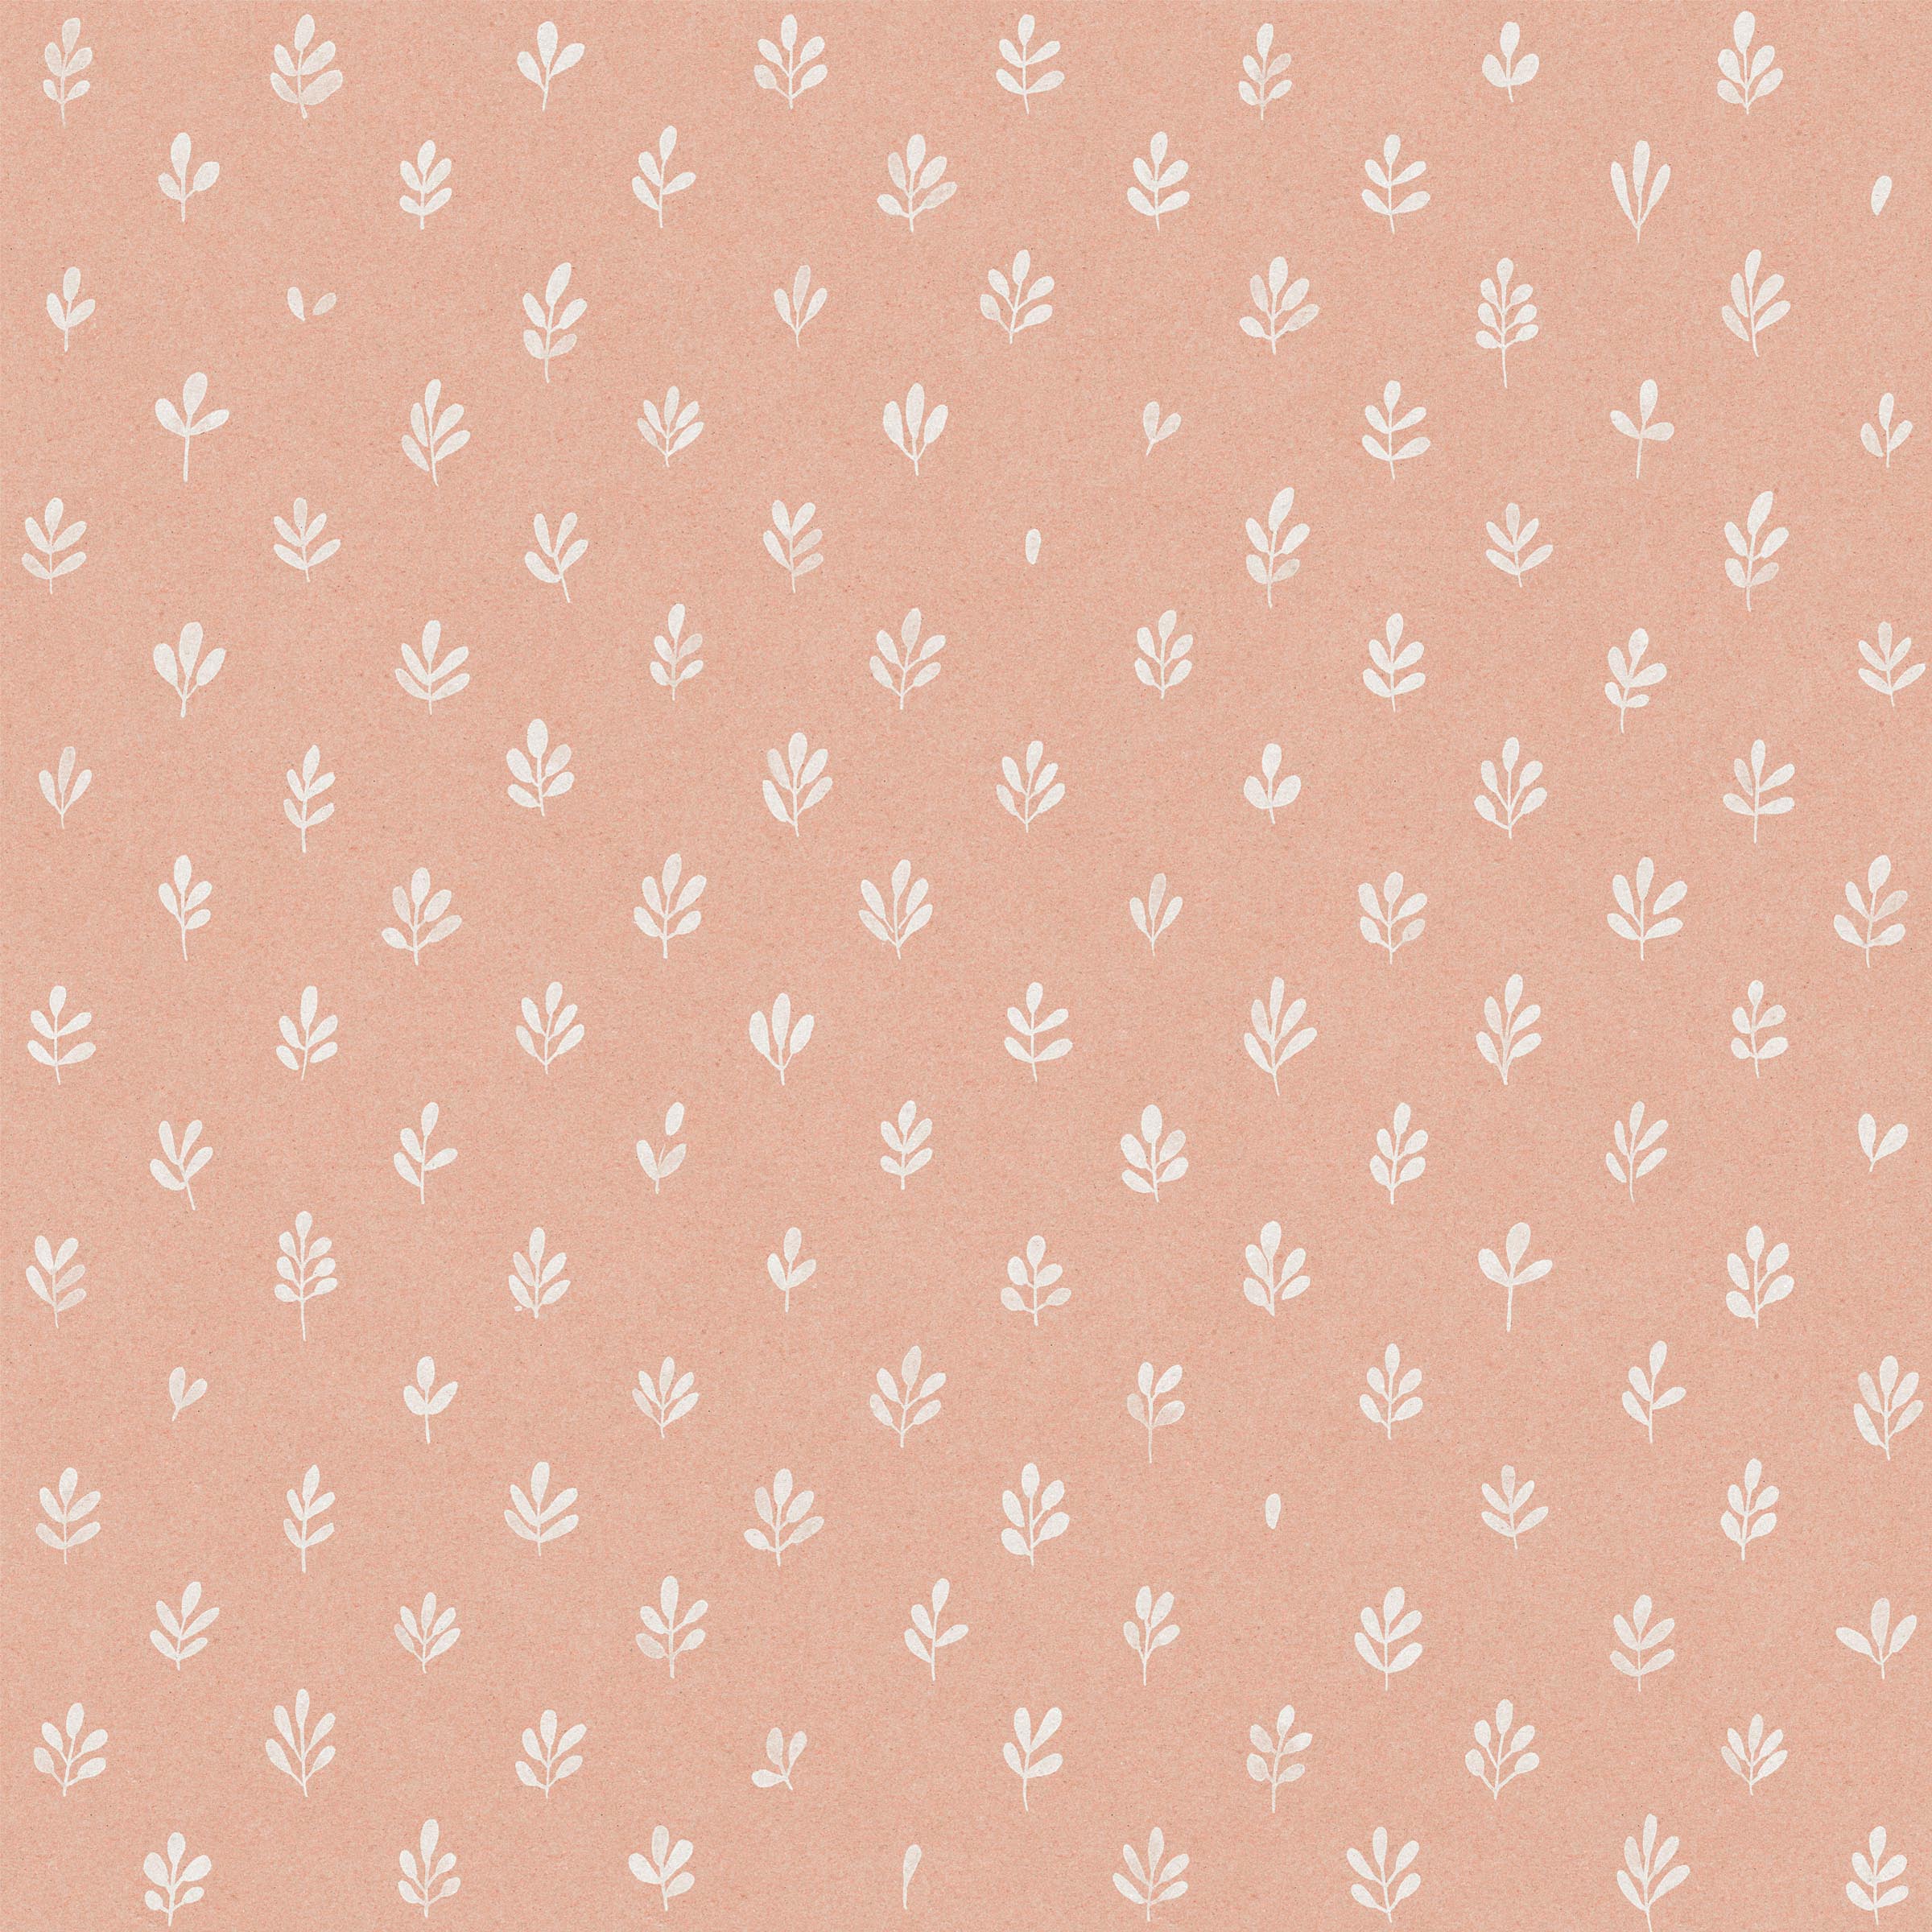 Detail of fabric in a repeating leaf print in cream on a light pink field.